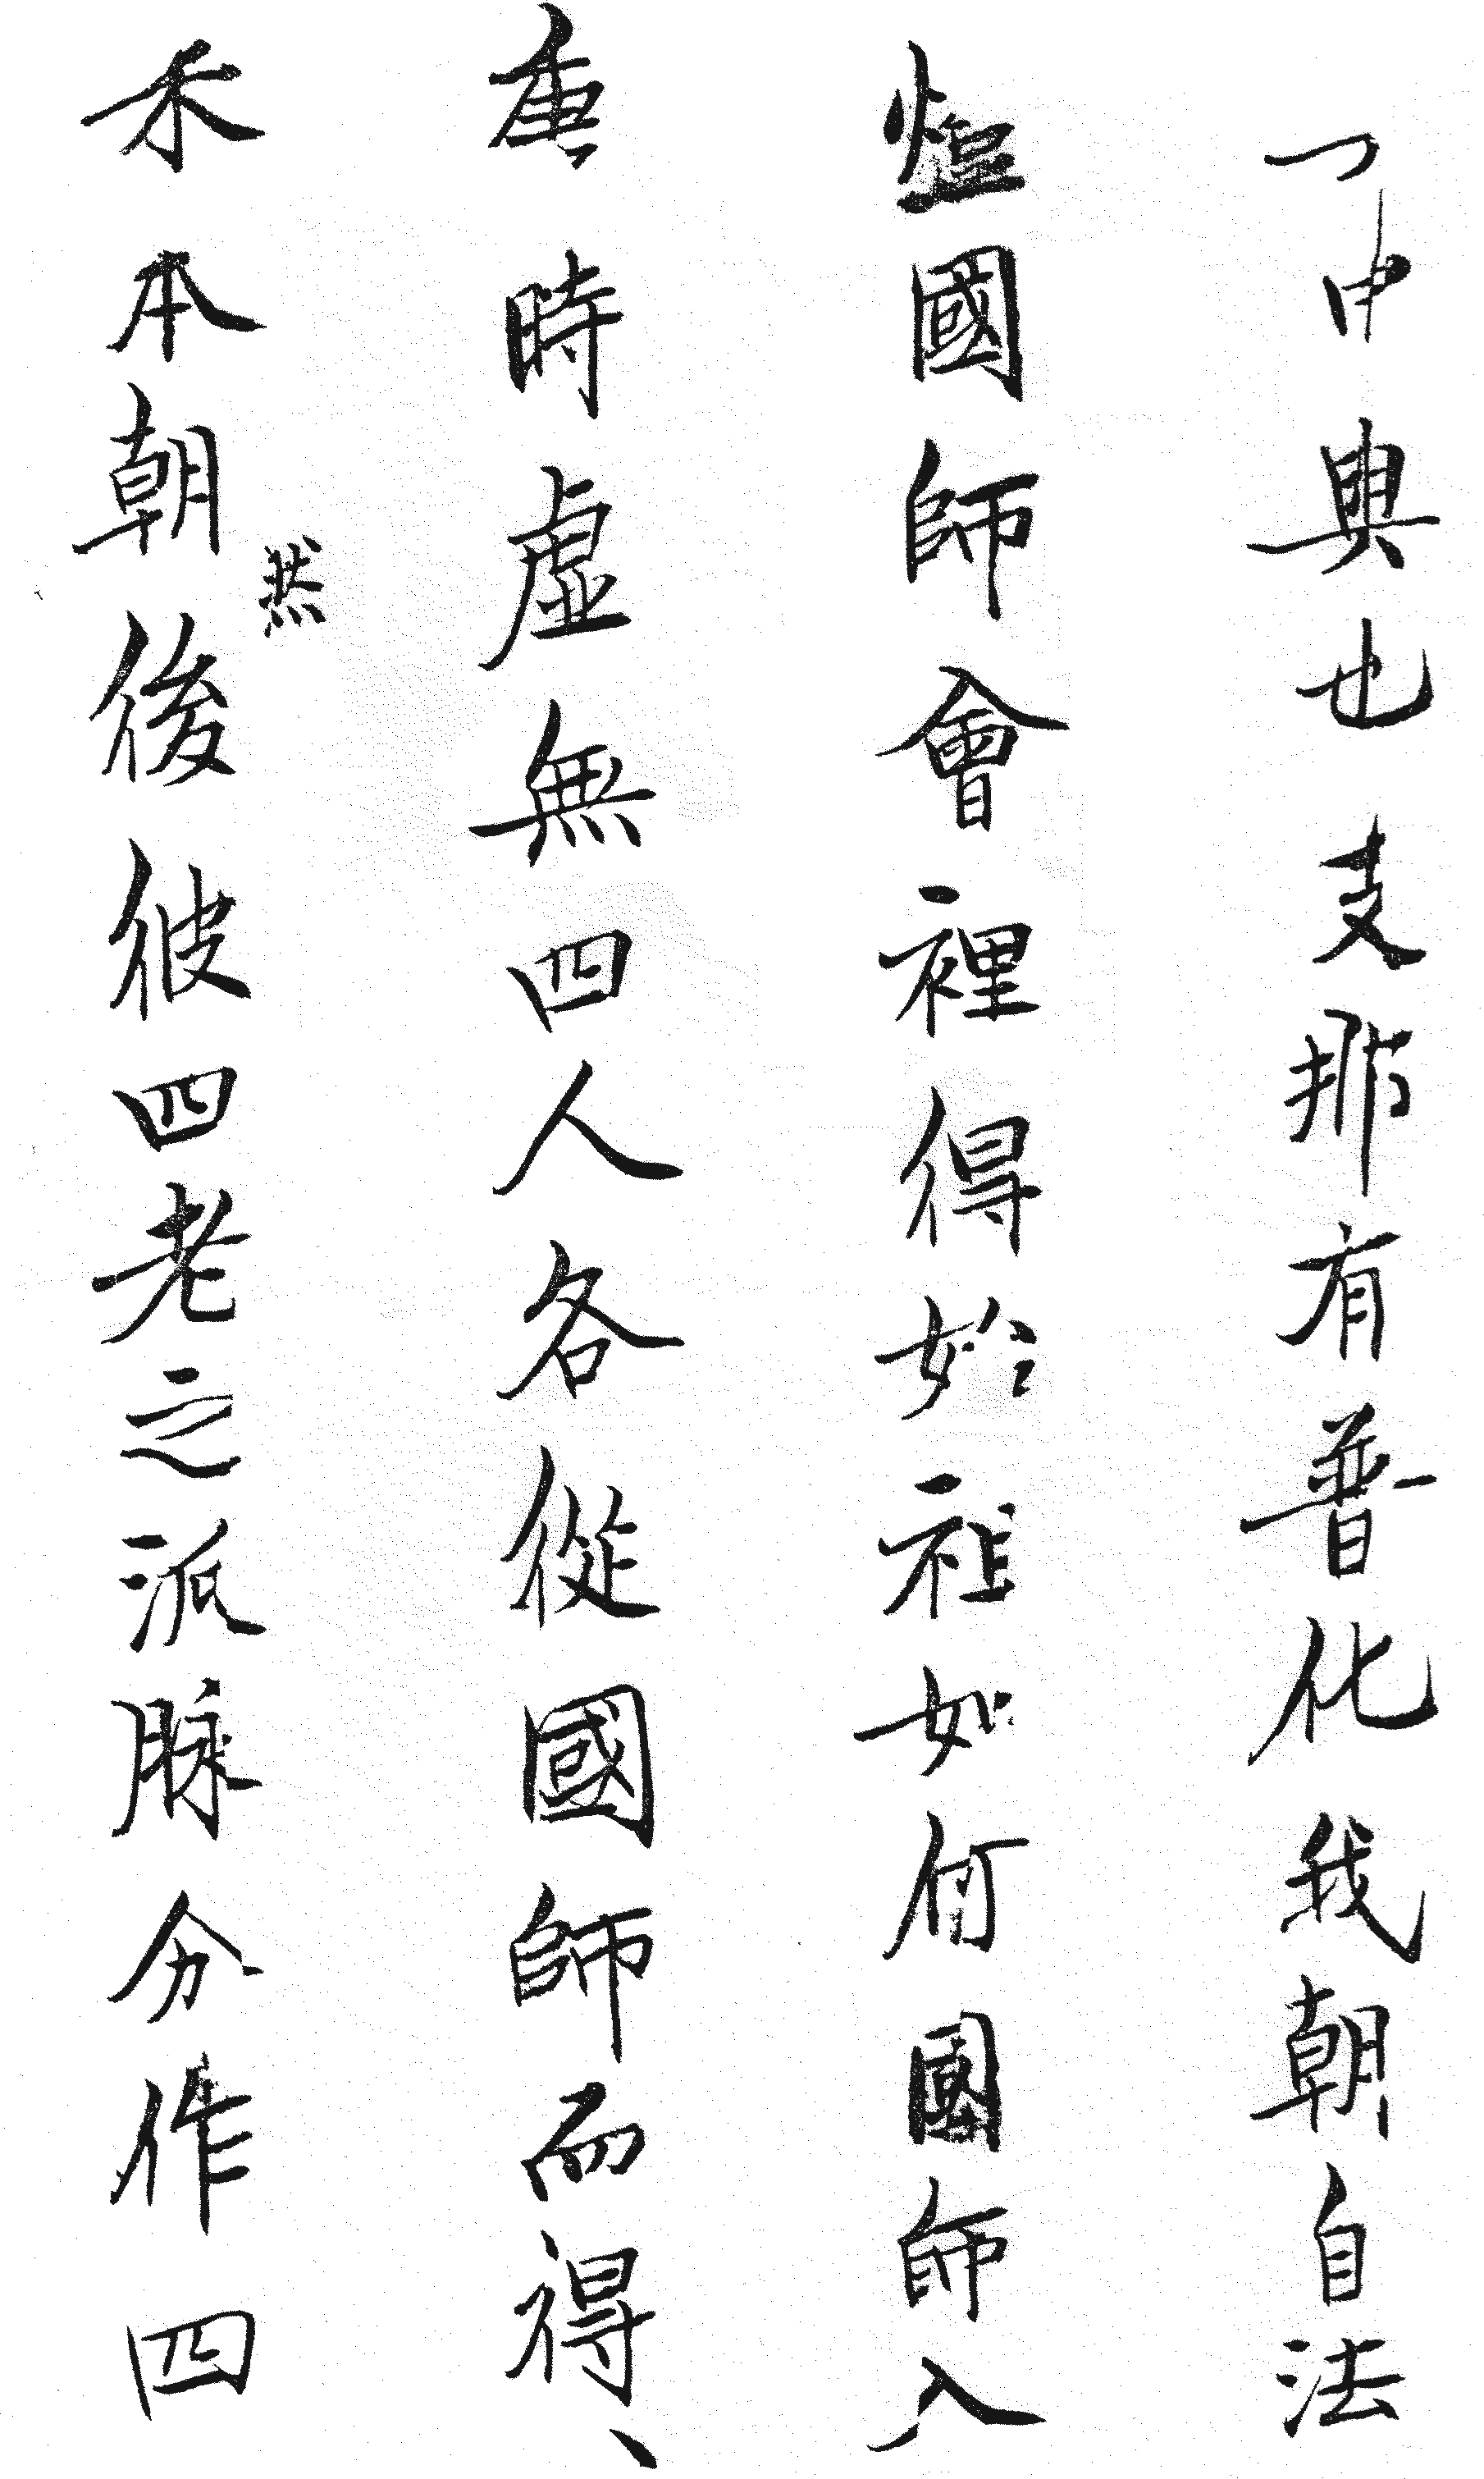 Isshi Bunshu's letter second section